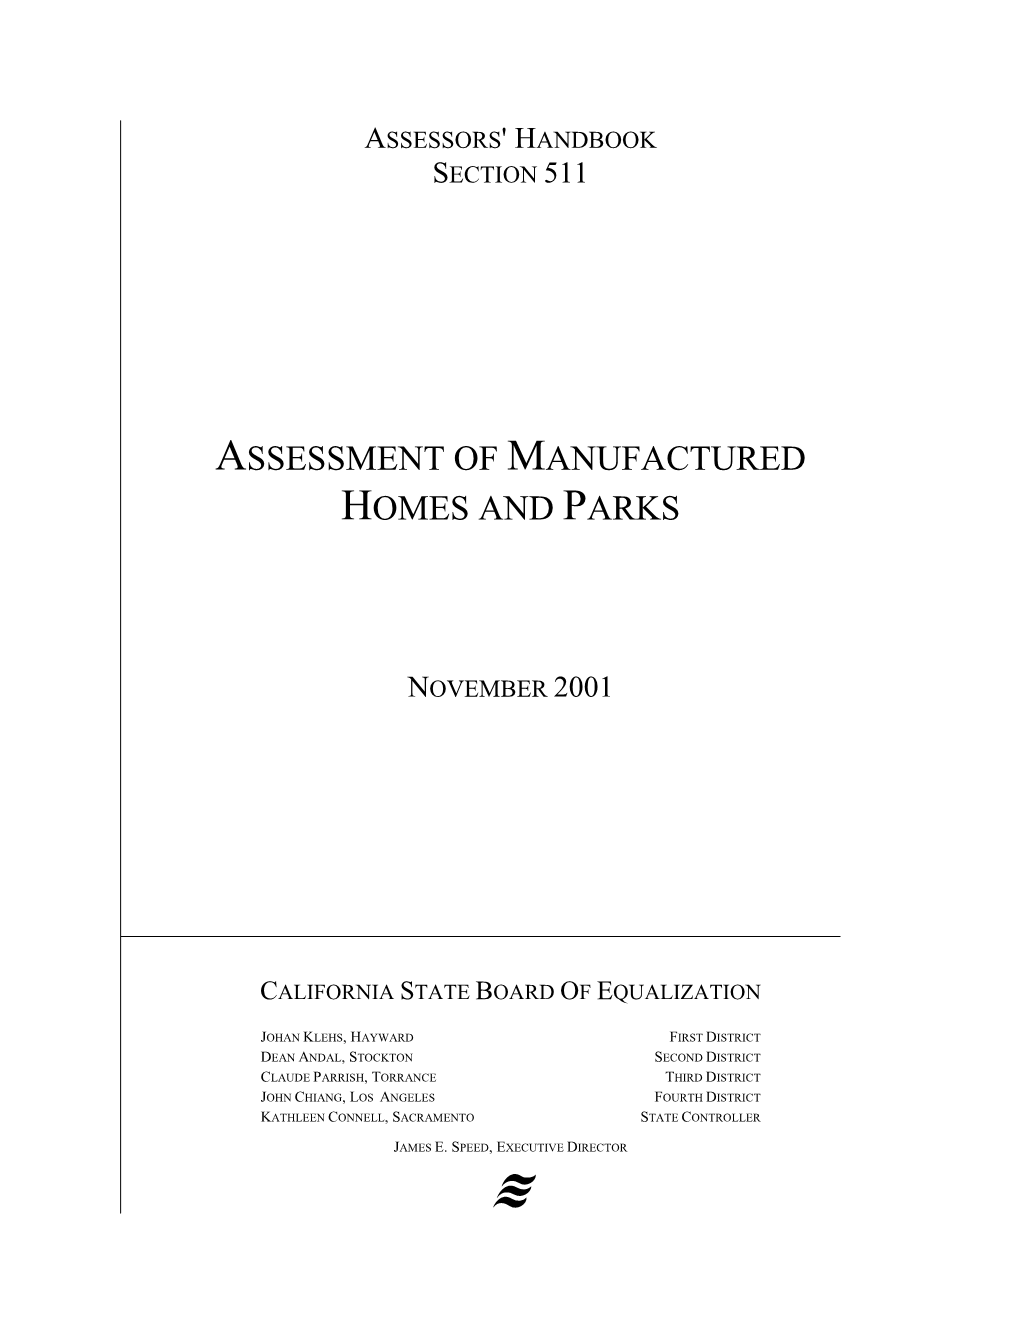 ASSESSORS' HANDBOOK Section 511, Assessment of Mobilehomes and Parks